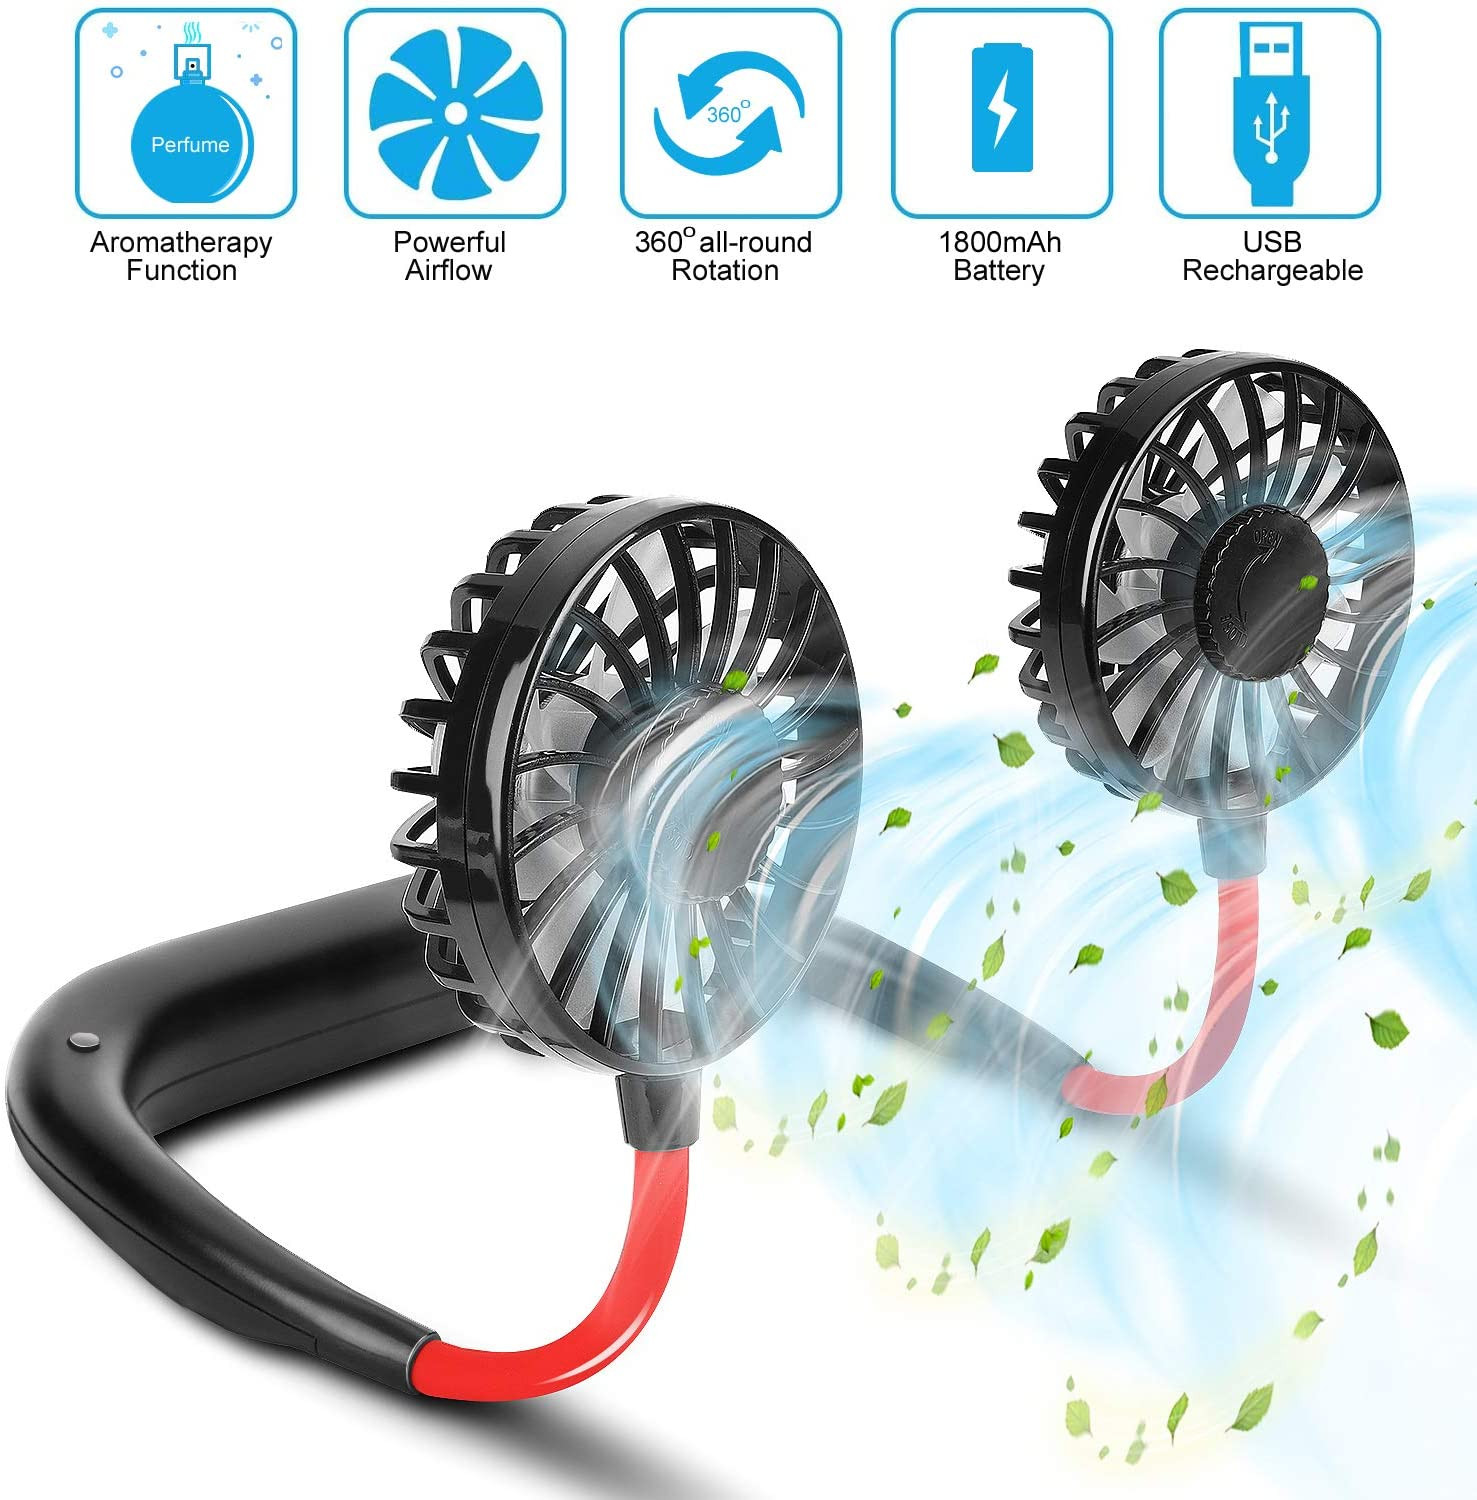 Portable-USB-Rechargeable-Lazy-Fan-Hanging-Neck-Cooling-With-Aromatherapy-Fan-1827304-1